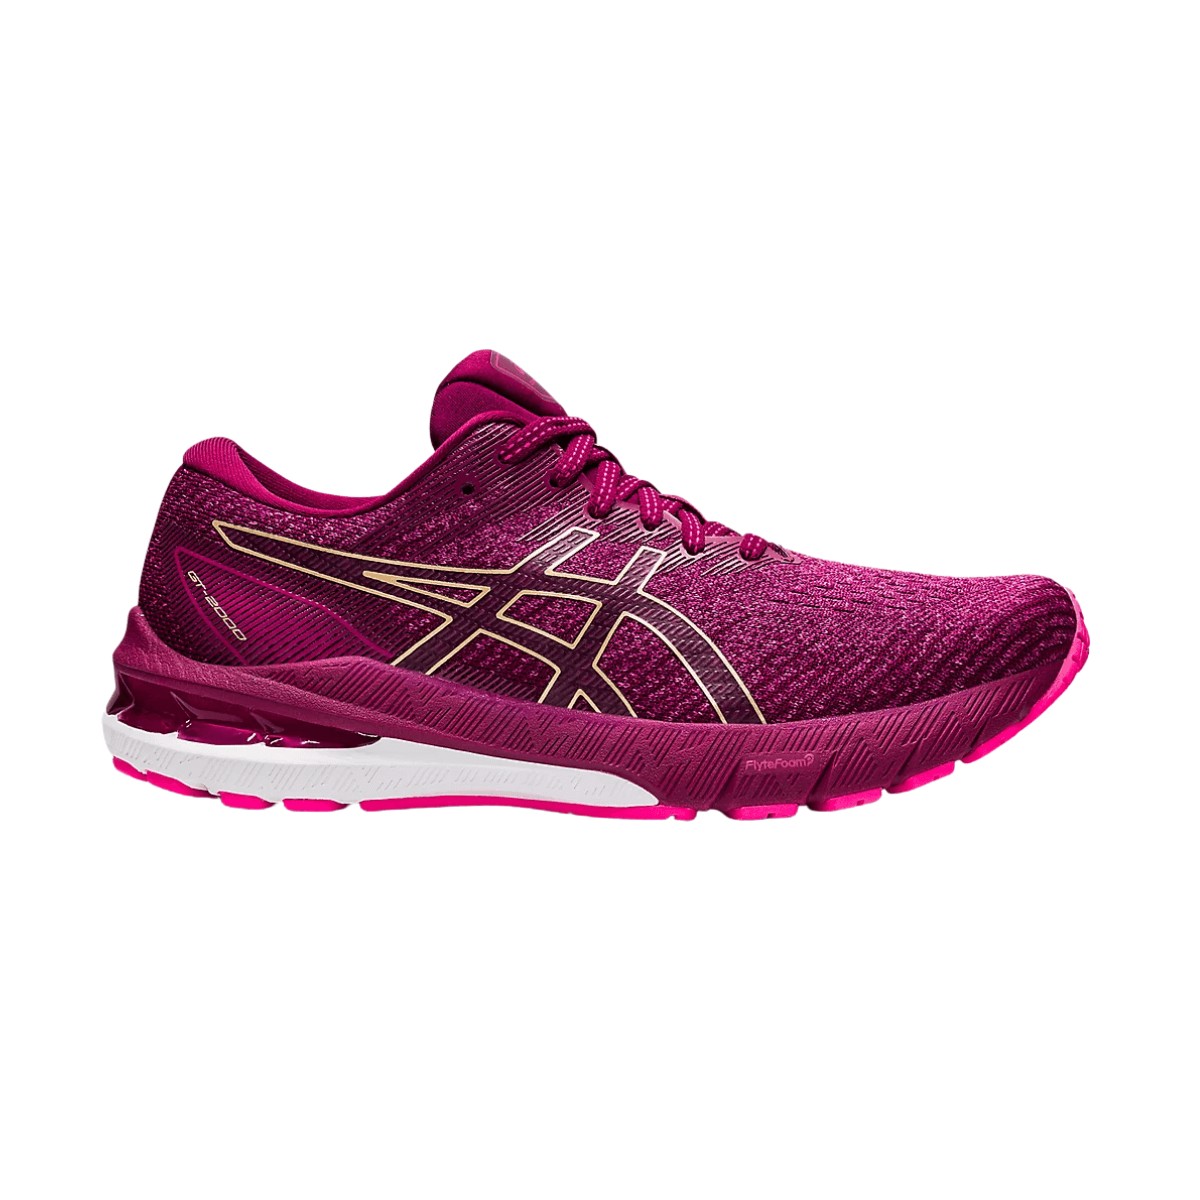 Asics GT-2000 10 Women's Shoes Pink Gold SS22, Size 37,5 - EUR